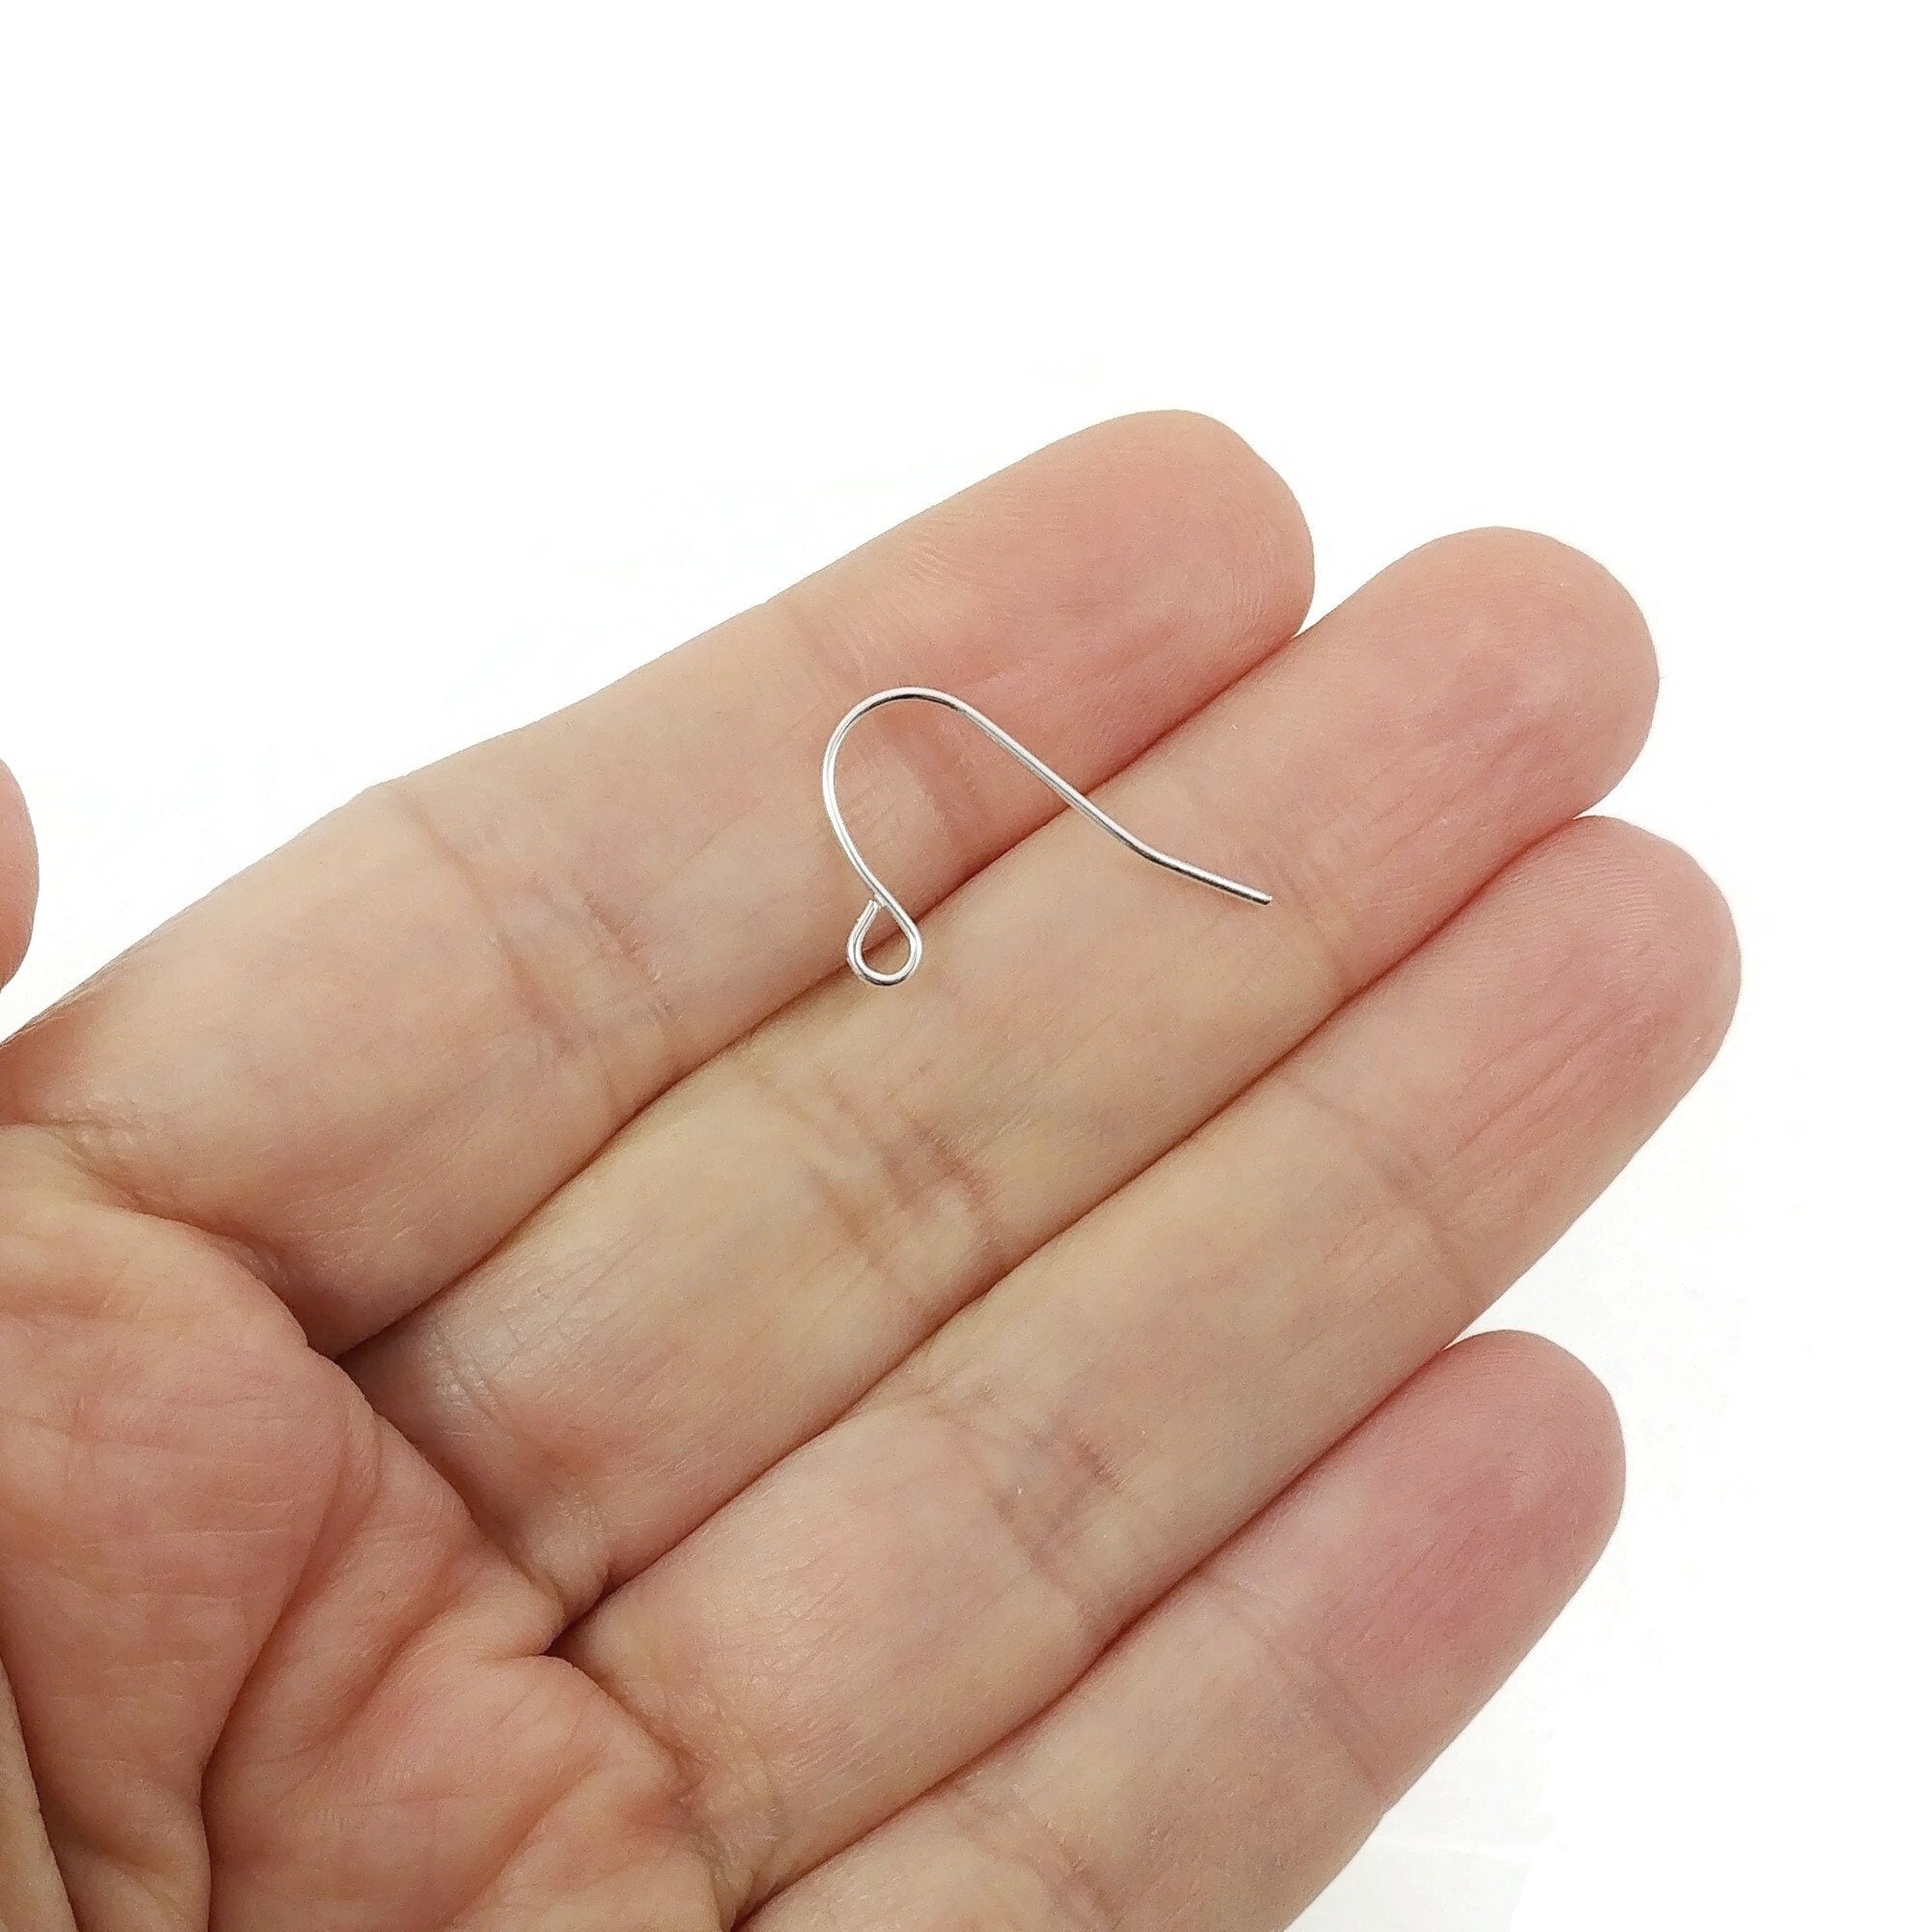 Matte Silver Hypoallergenic Nickel Free Titanium French Fish Hook Earring  Findings with Open Loop Ring~Sold Individually